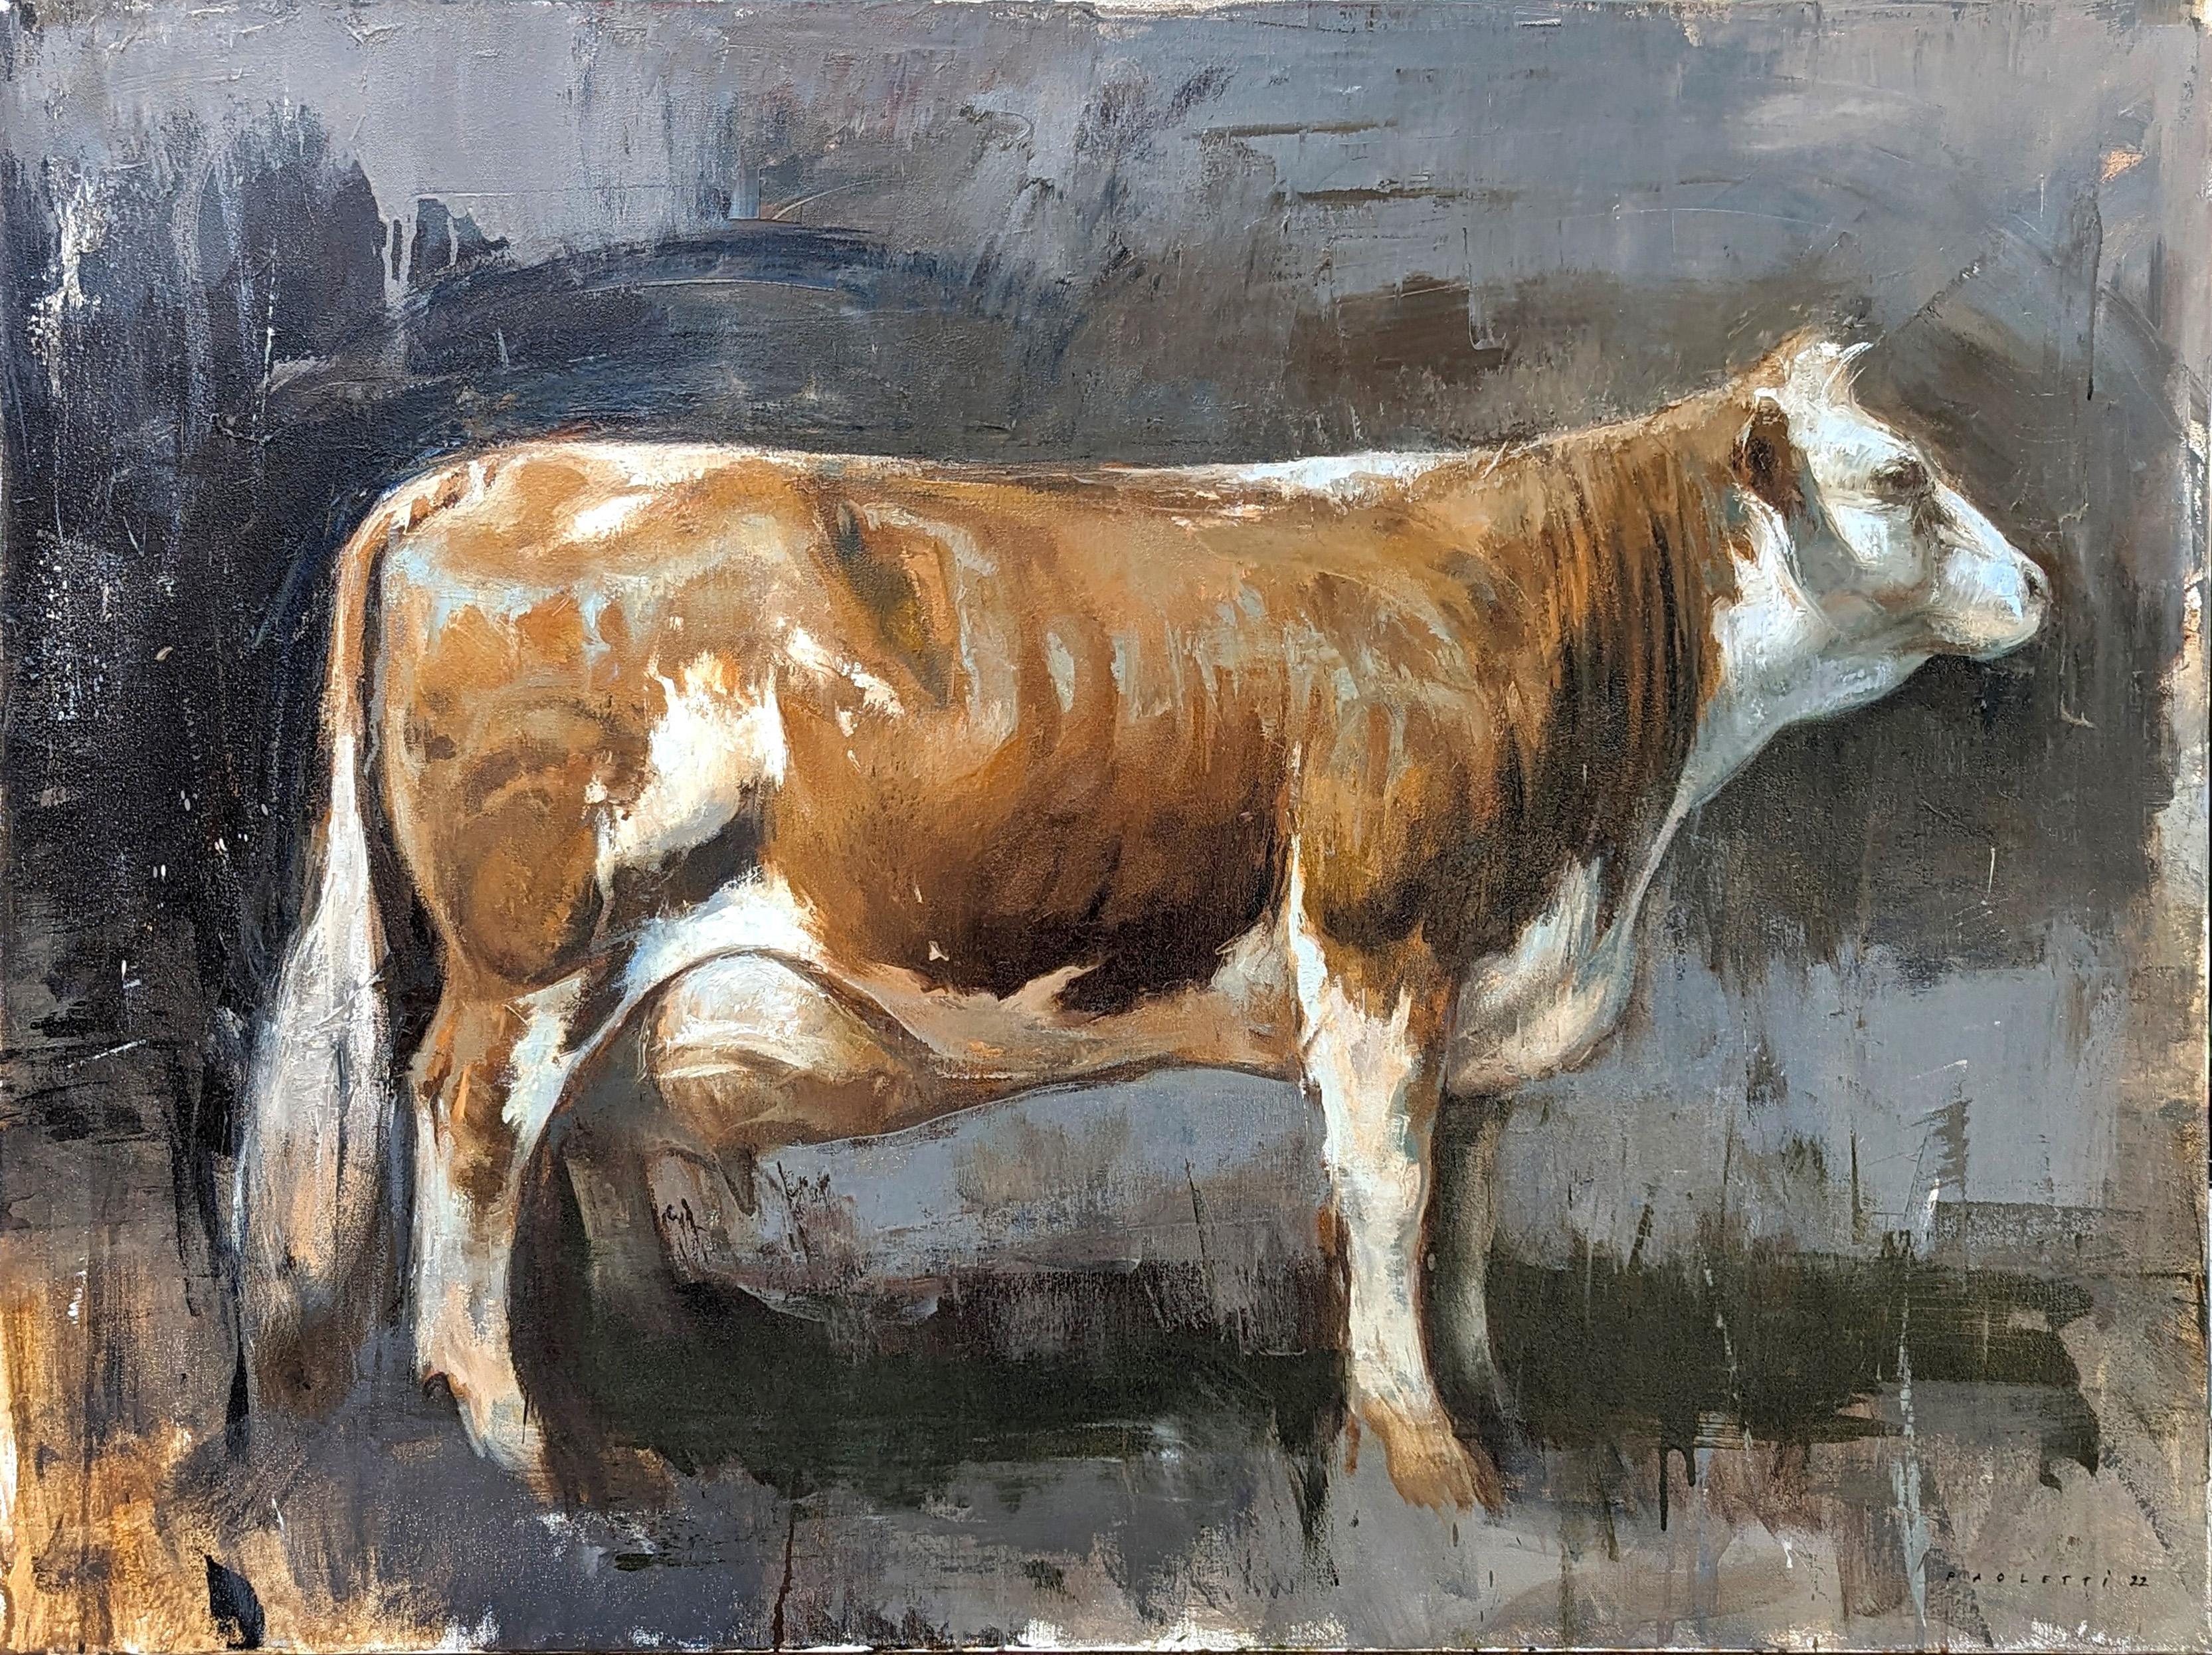 "How Now" Contemporary Naturalistic Rural Animal Painting of a Brown Cow